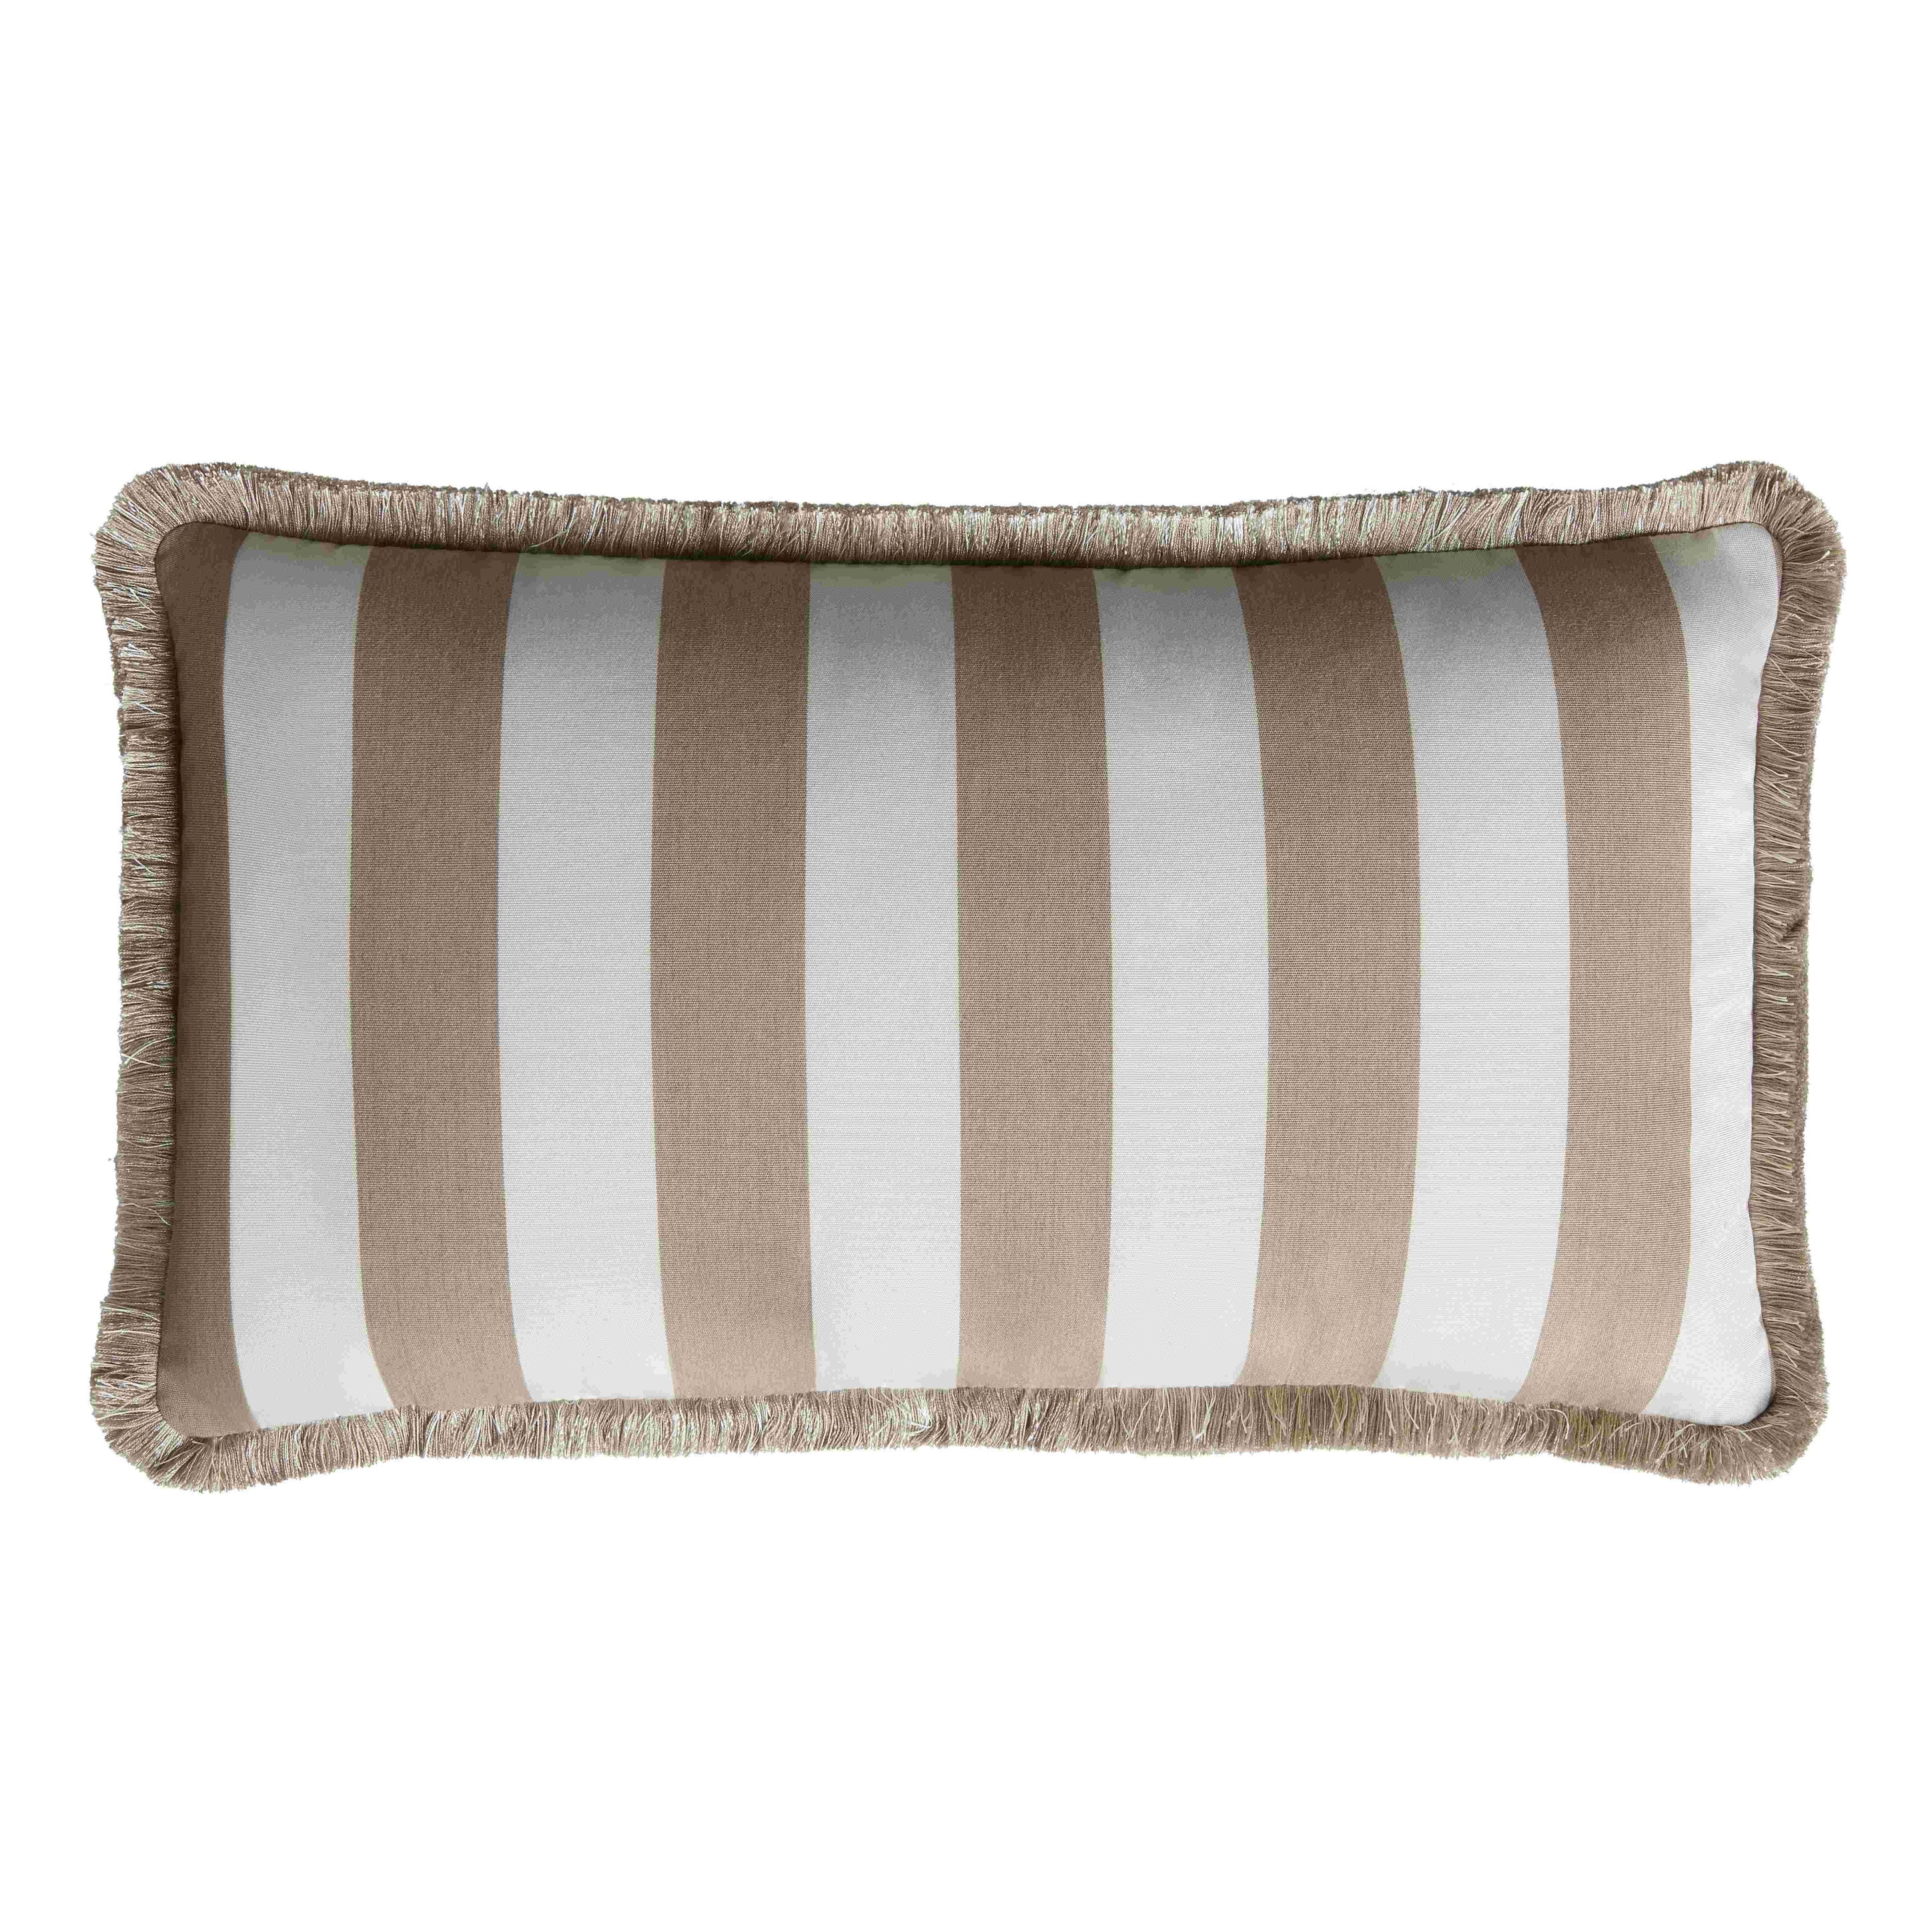 OutdoorIndoorCoupleStripedCushionsWithFringes-PipingBeigedetail1LS_614e460c-db36-4a0f-aef7-01a41252f047.jpg